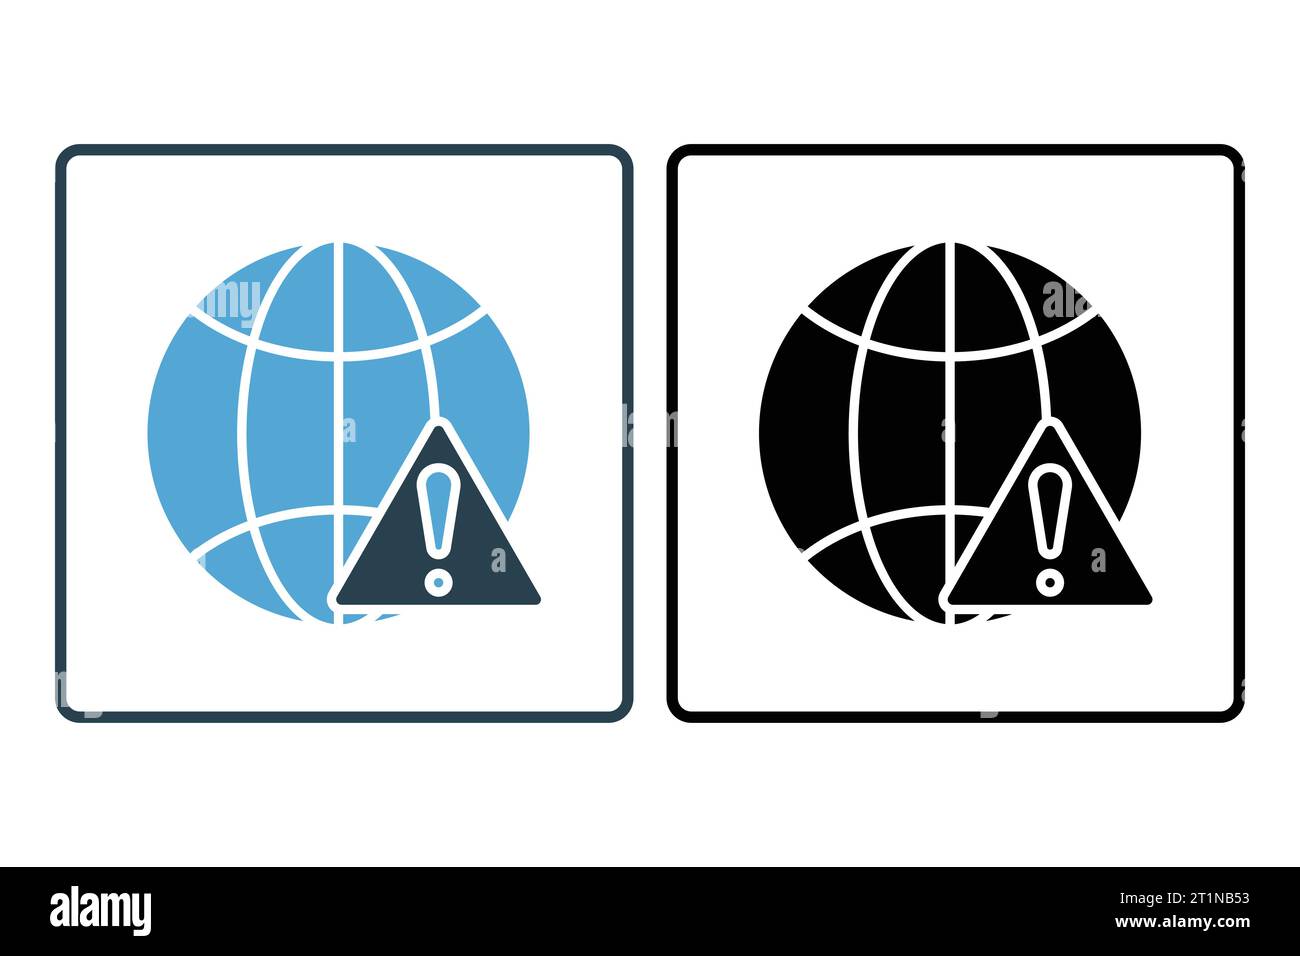 Network error icon. earth with exclamation mark. icon related to warning, notification. suitable for web site, app, user interfaces, printable etc. So Stock Vector